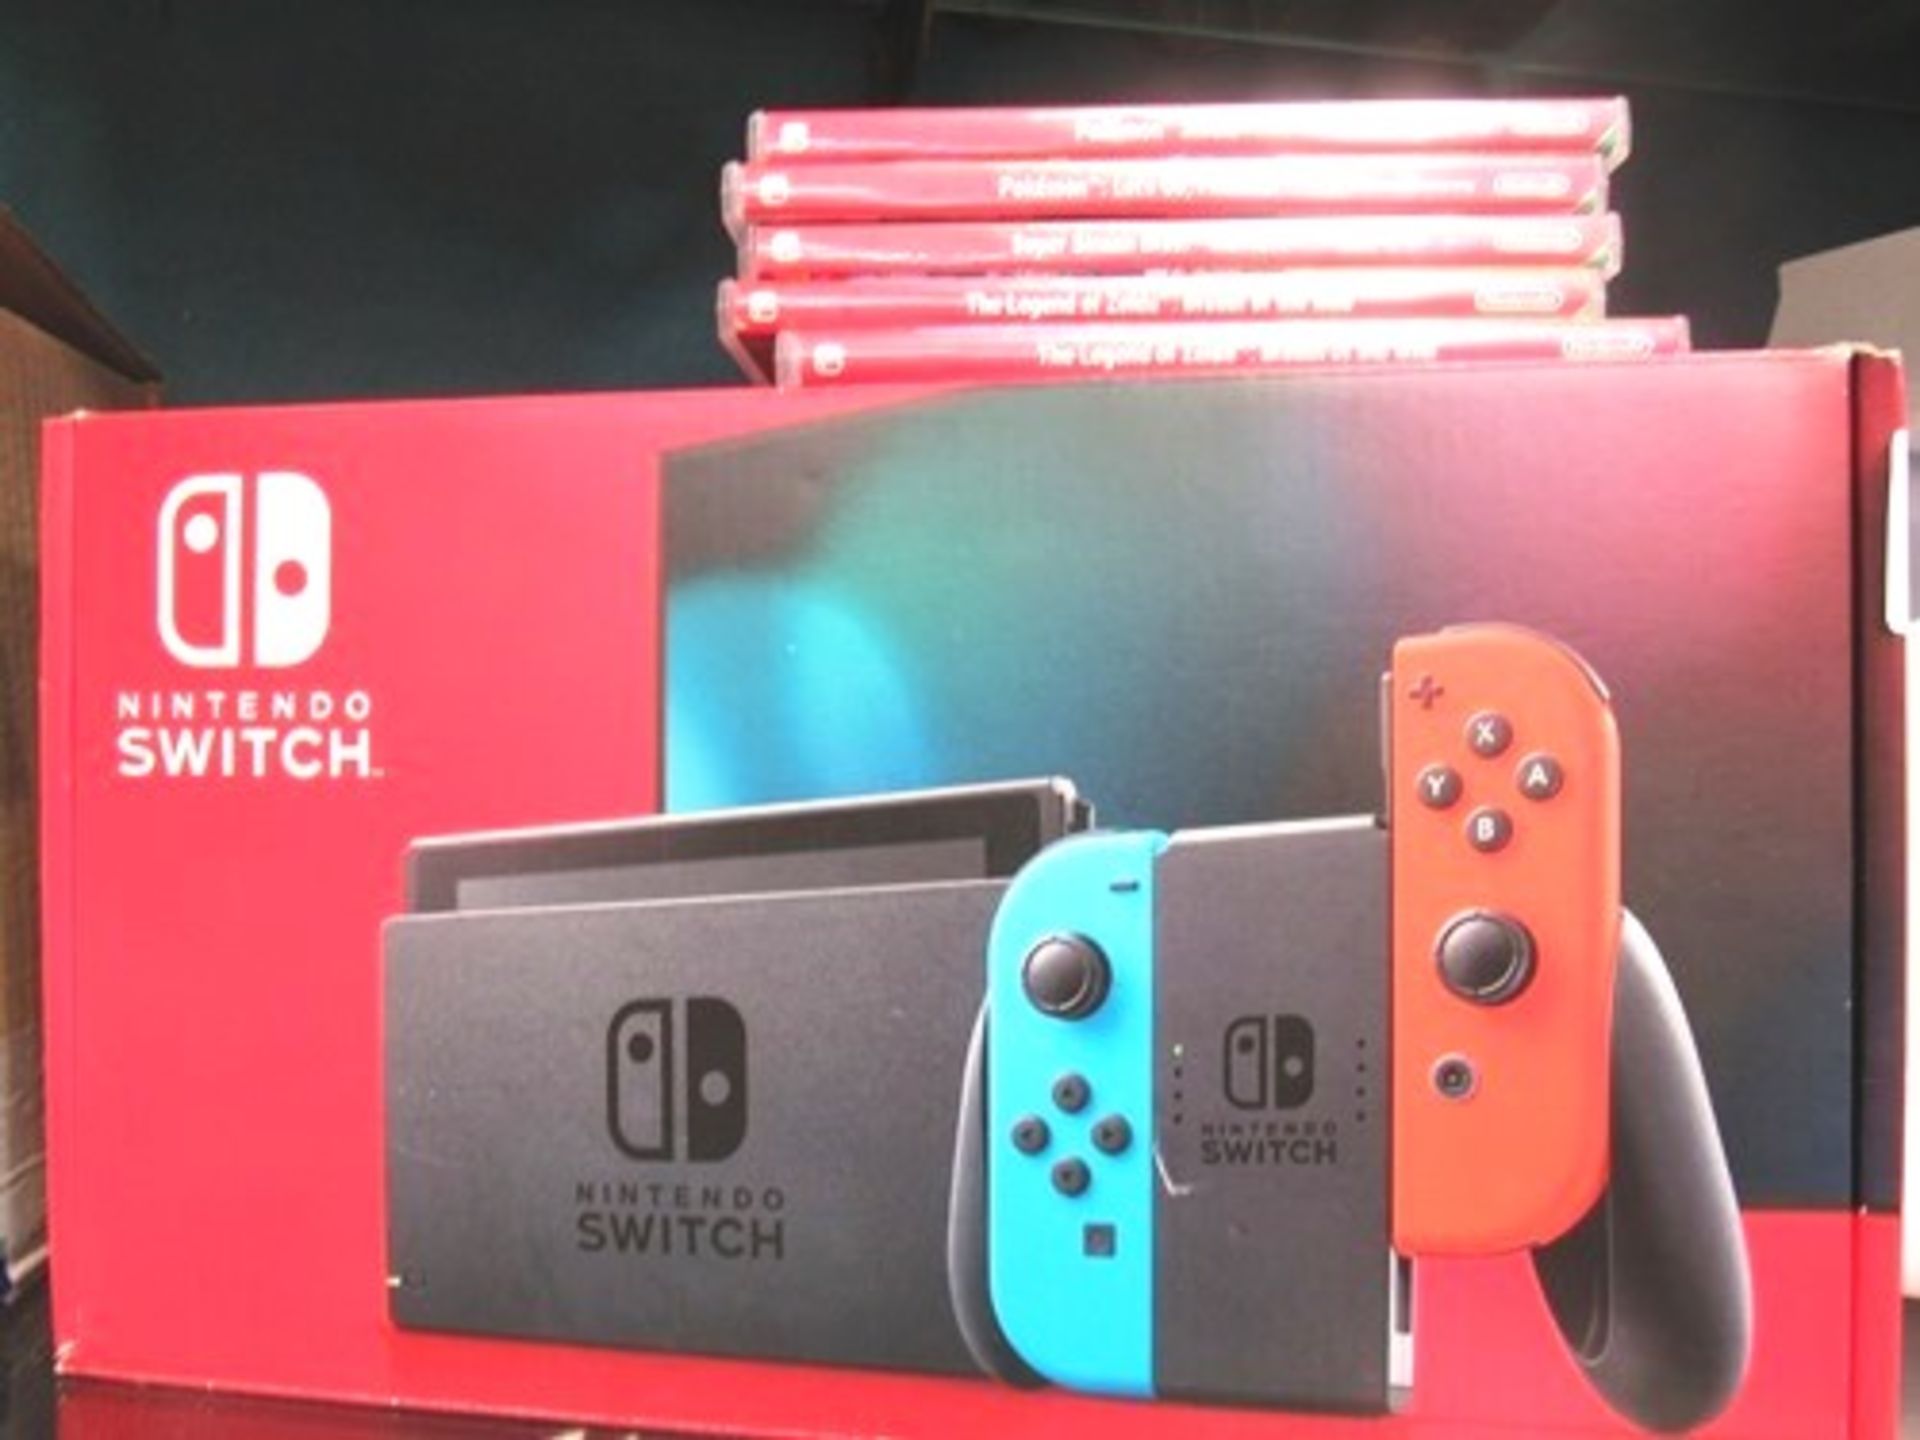 1 x Nintendo switch games console, Ref No. XKJ40000702283 together with 5 x second-hand games